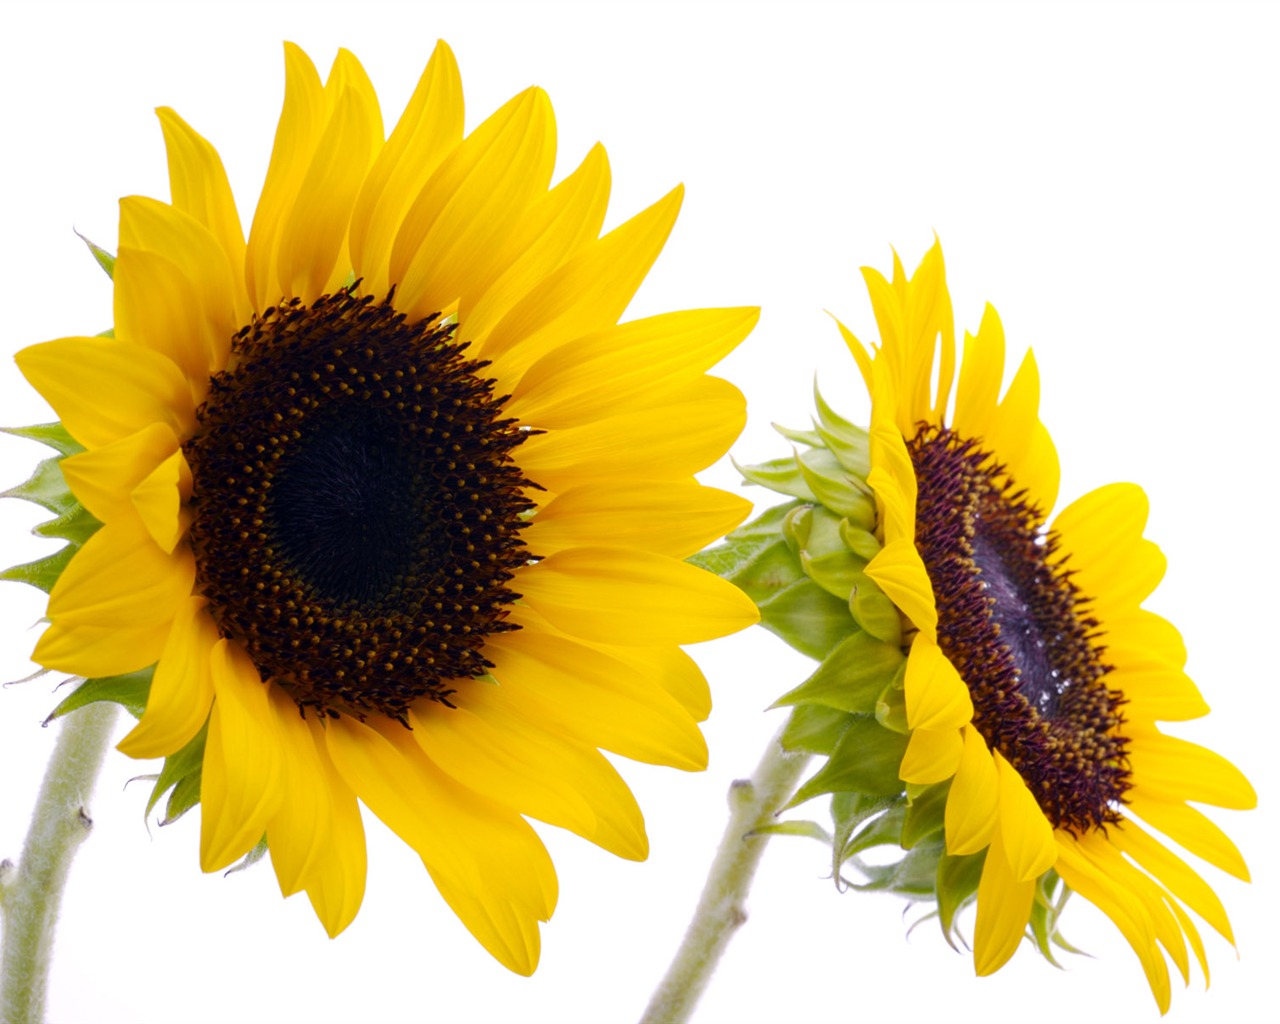 Sunny sunflower photo HD Wallpapers #28 - 1280x1024